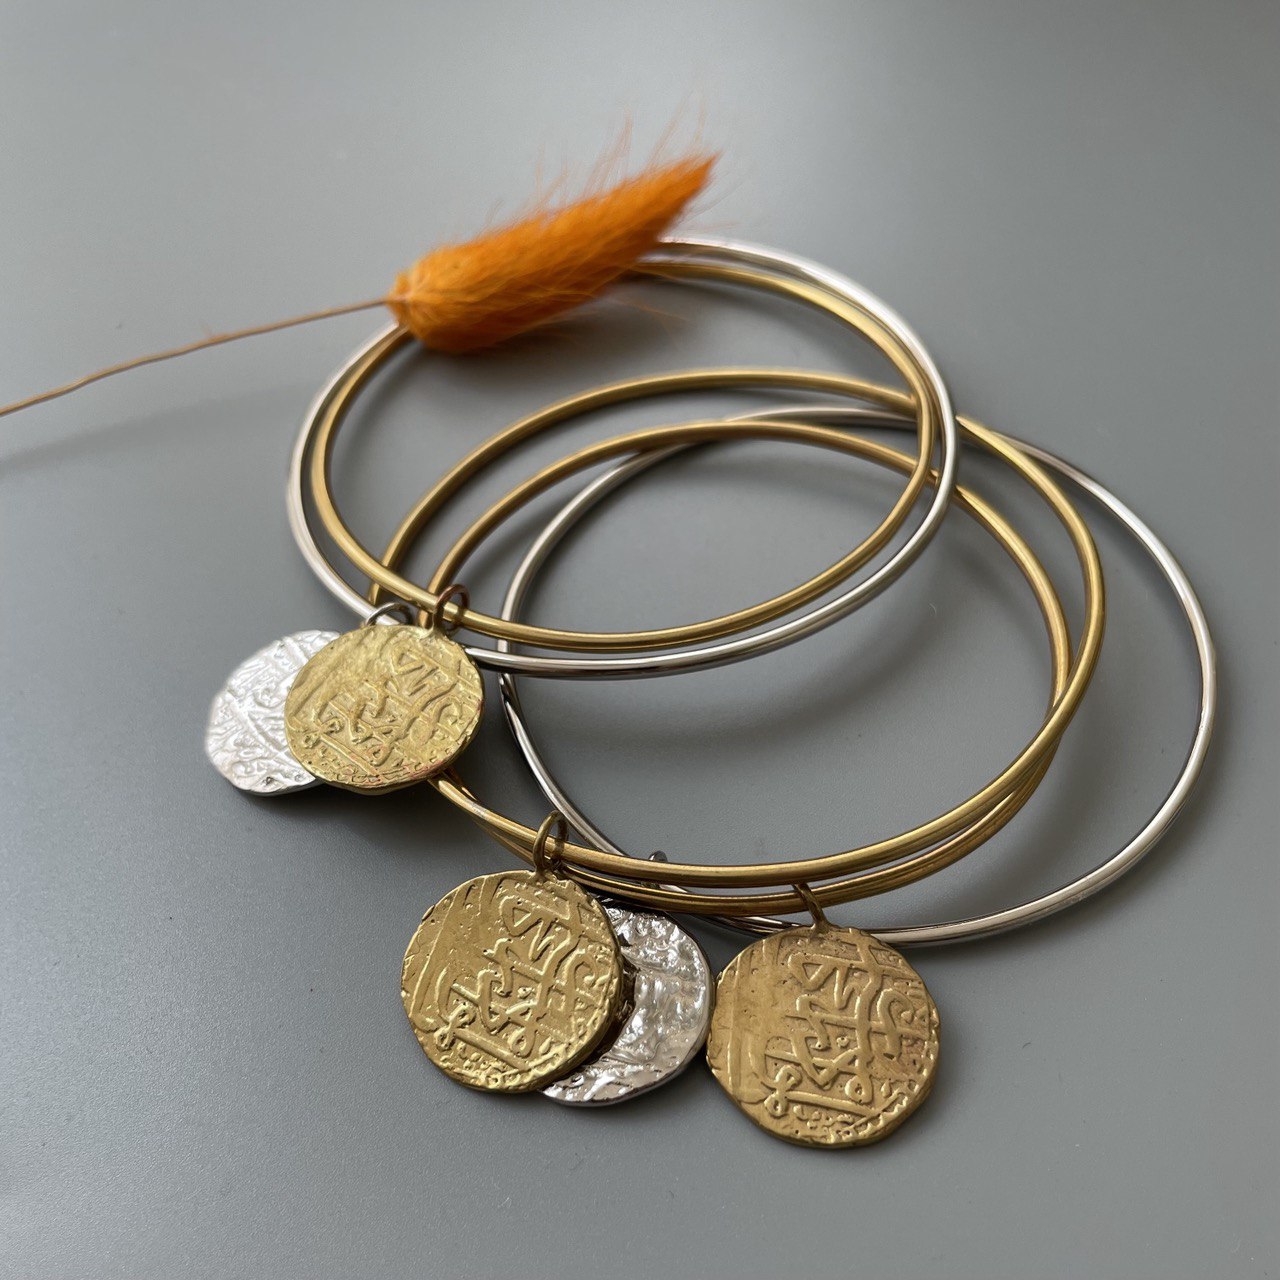 Persian Bracelet-Minimal Bracelet with Persian Coin Charm:Persian Jewelry-AFRA ART GALLERY